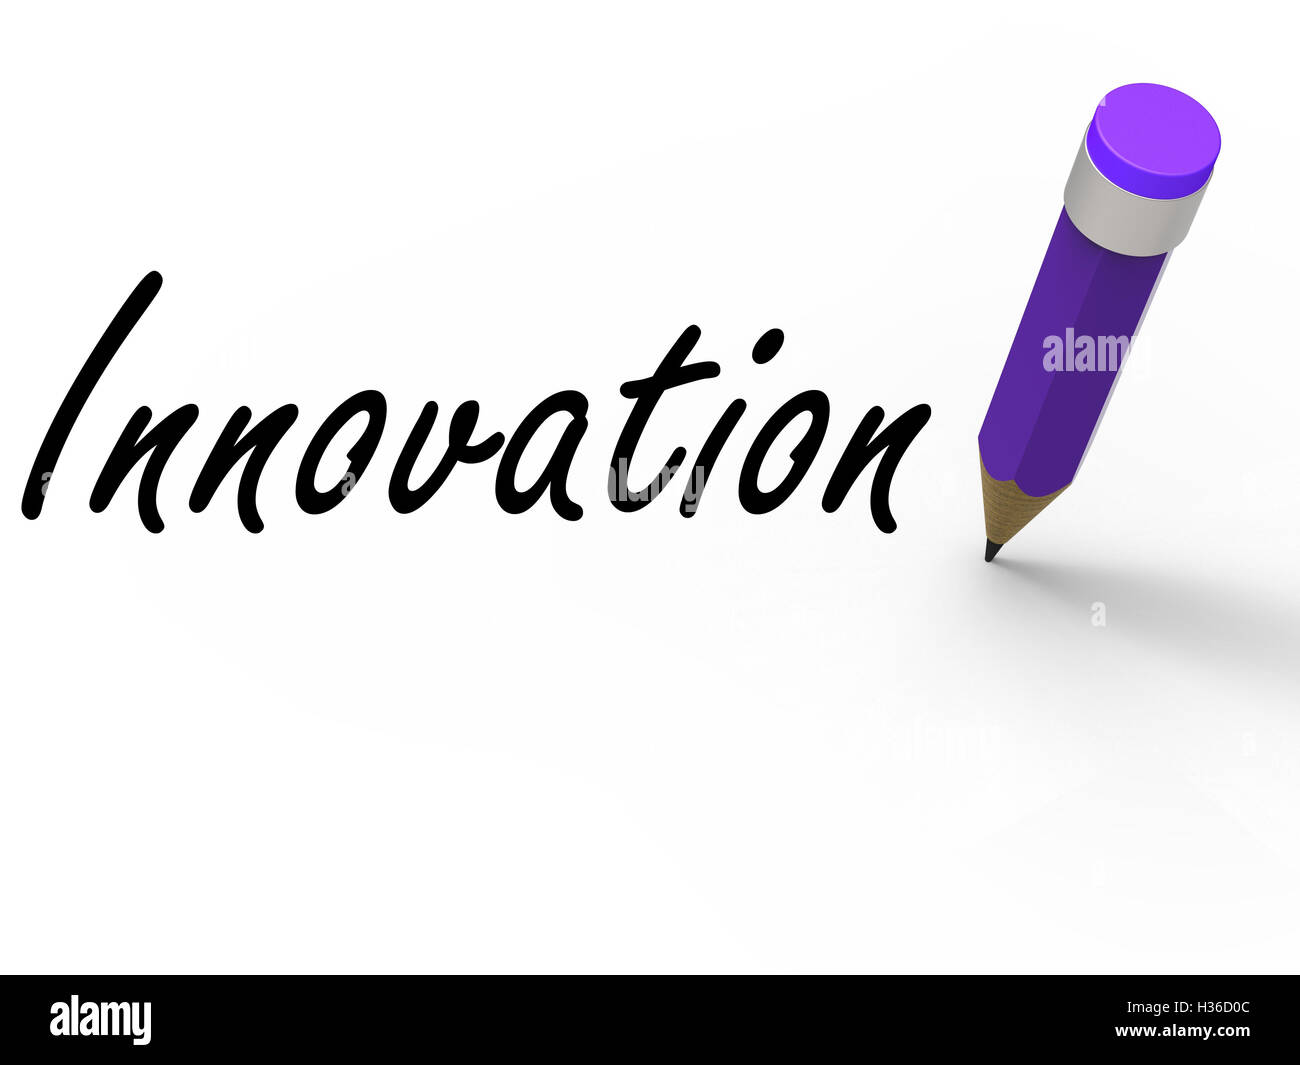 Innovation and Pencil Show Ideas Creativity and Imagination Stock Photo